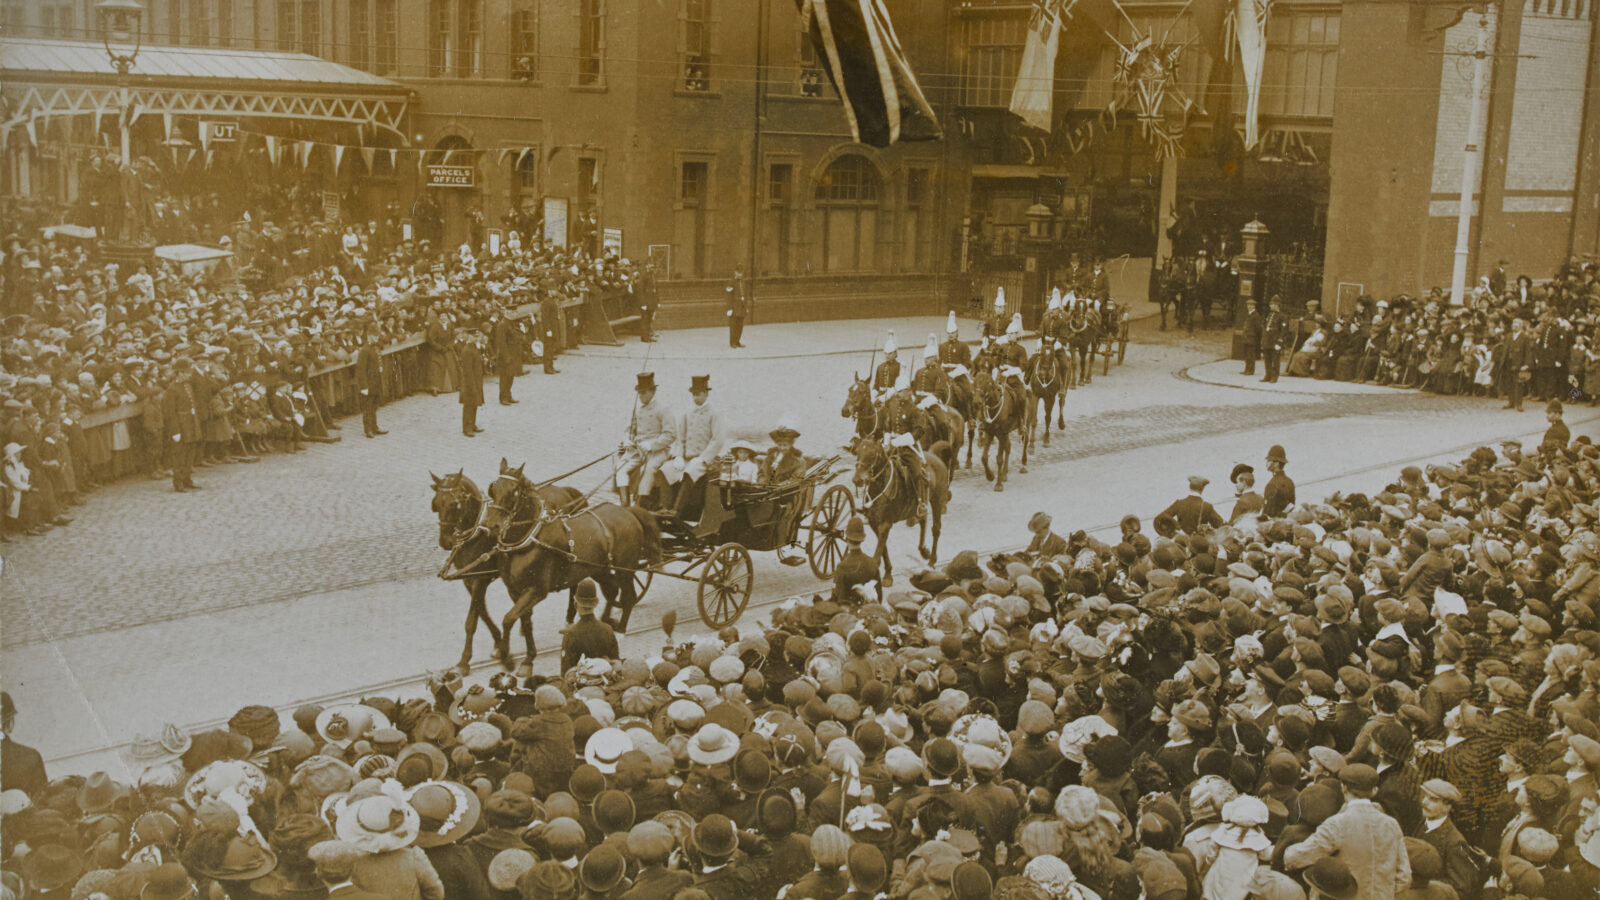 Black and white photograph of horse and carriage leaving the train station. Crowds line the streets.